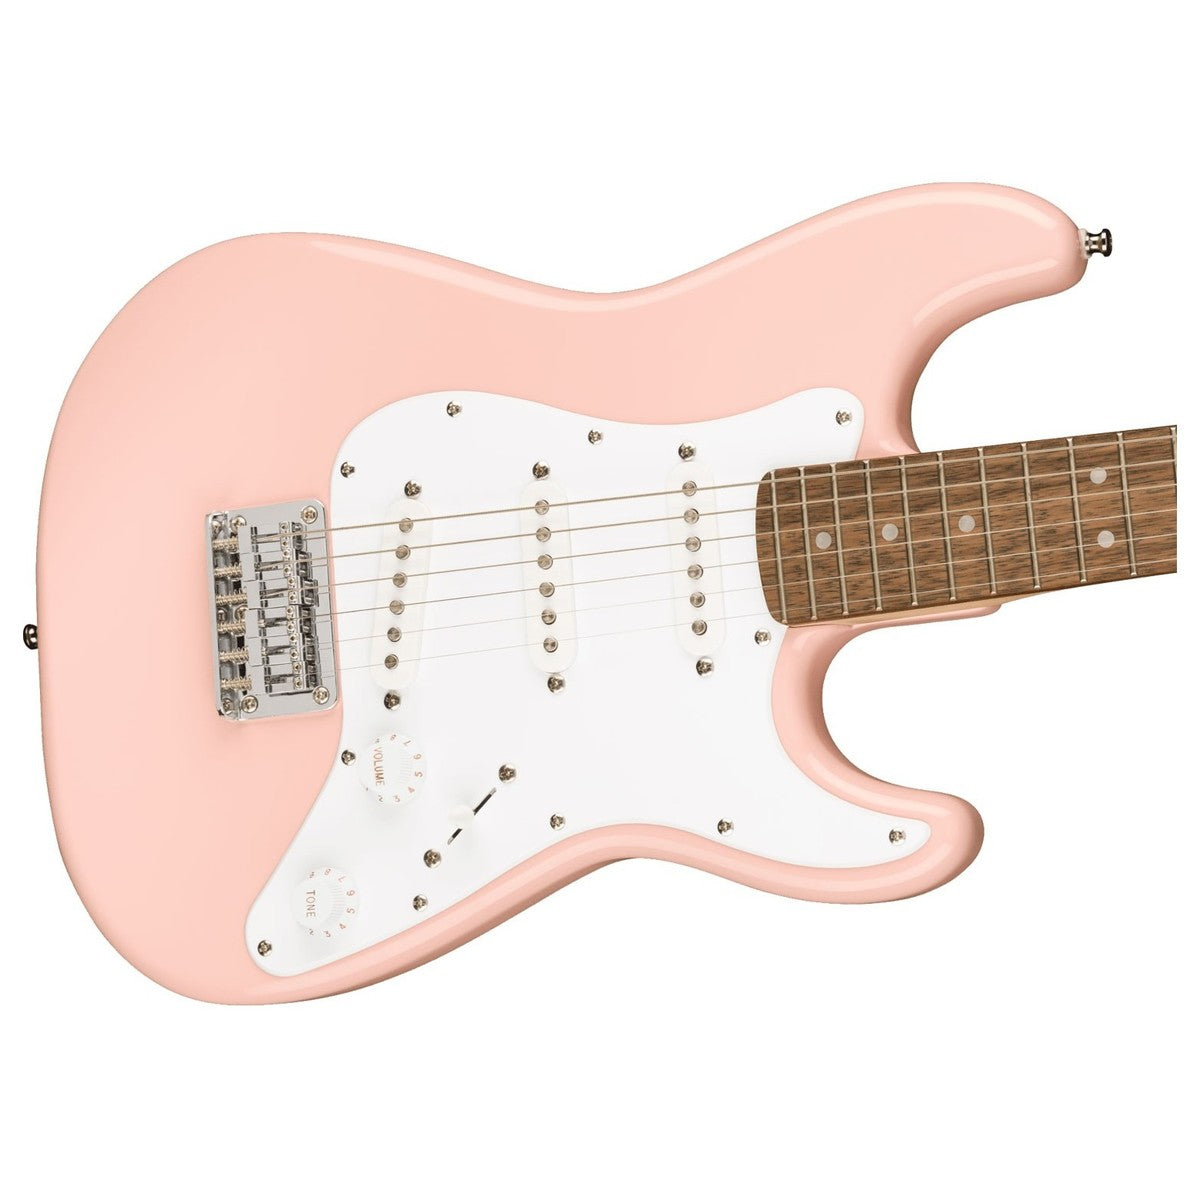 Squier Mini Stratocaster Size 3/4 Shell Pink